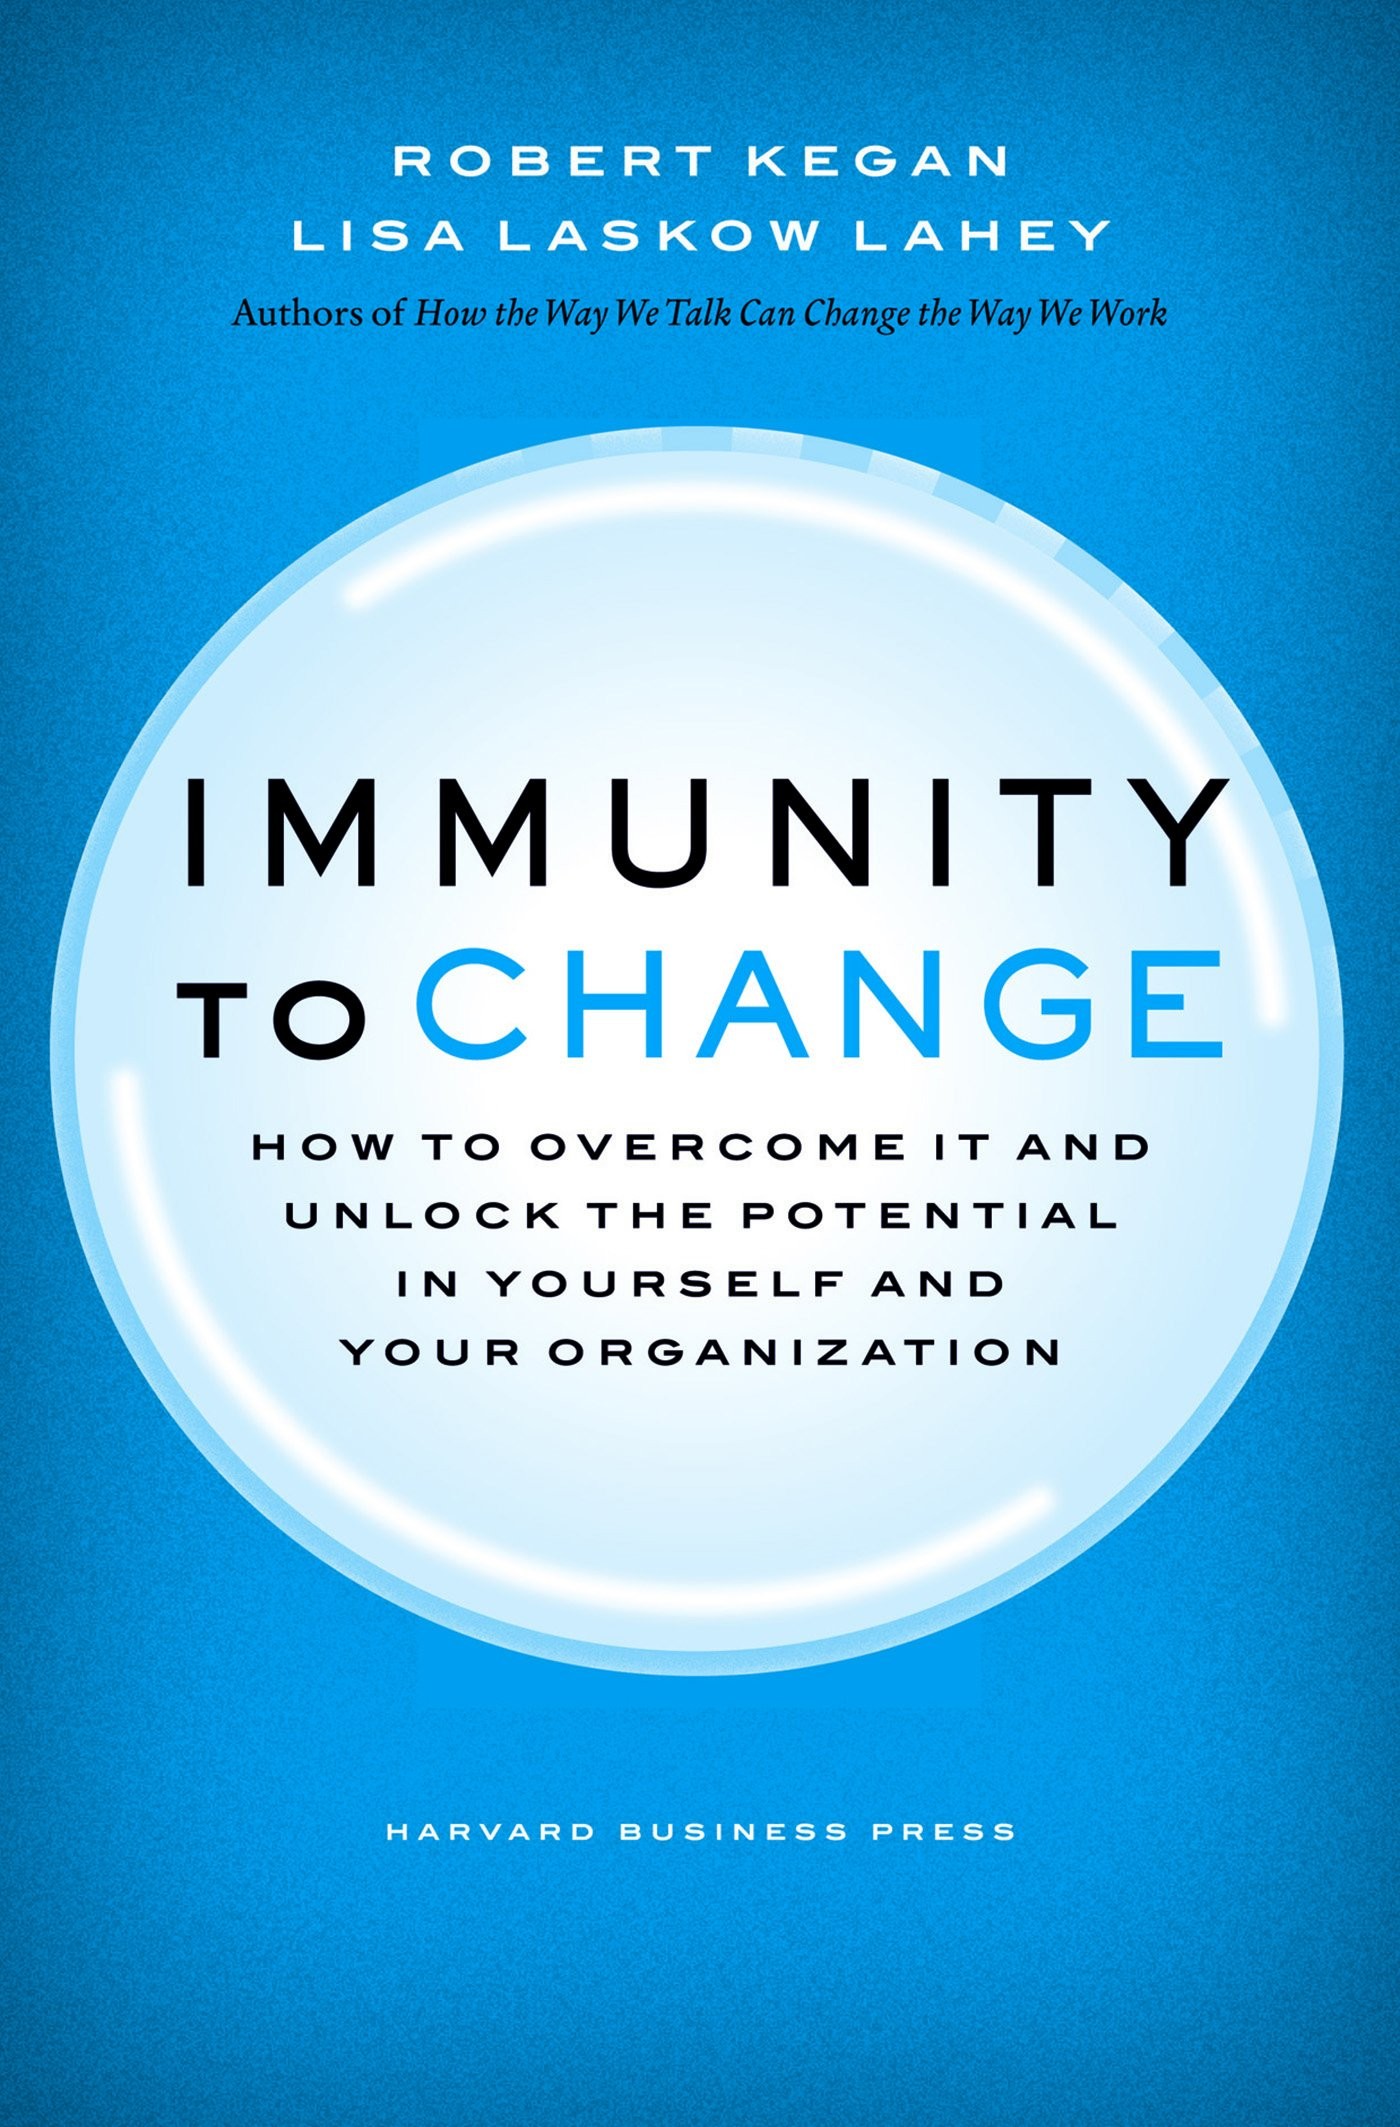 Immunity to Change: How to Overcome It and Unlock Potential in Yourself and Your Organization